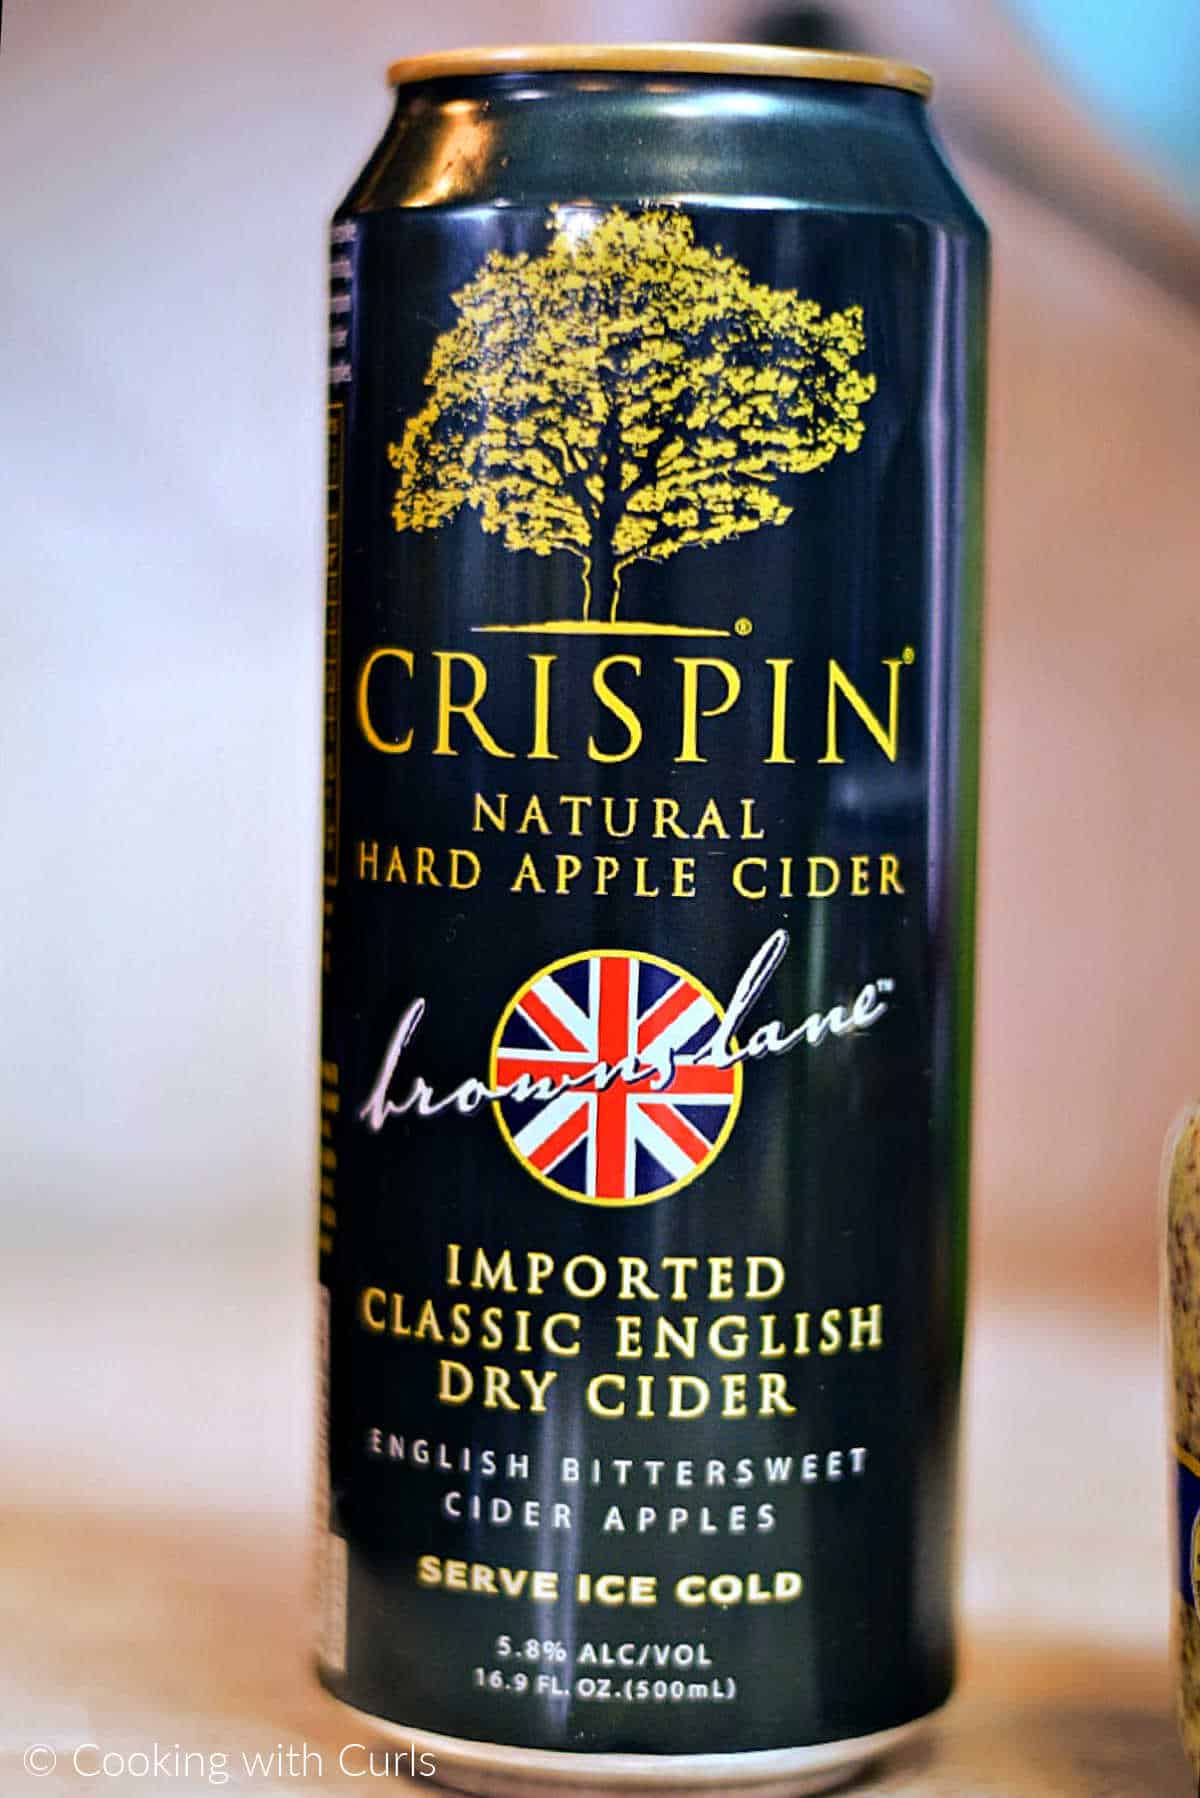 A can of Crispin Hard Apple Cider.